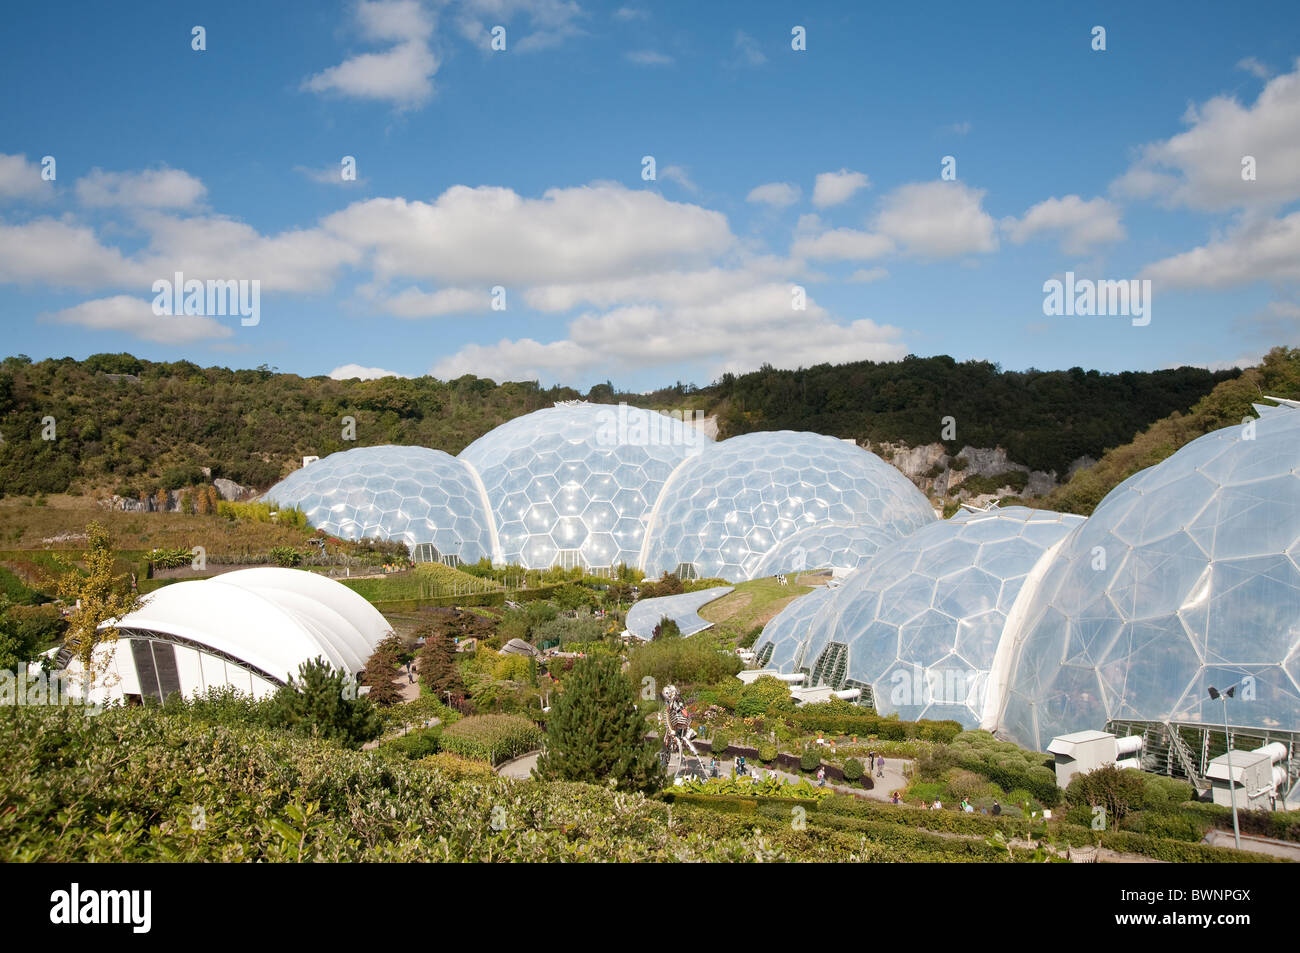 Eden Project biomes, Cornwall, UK Banque D'Images